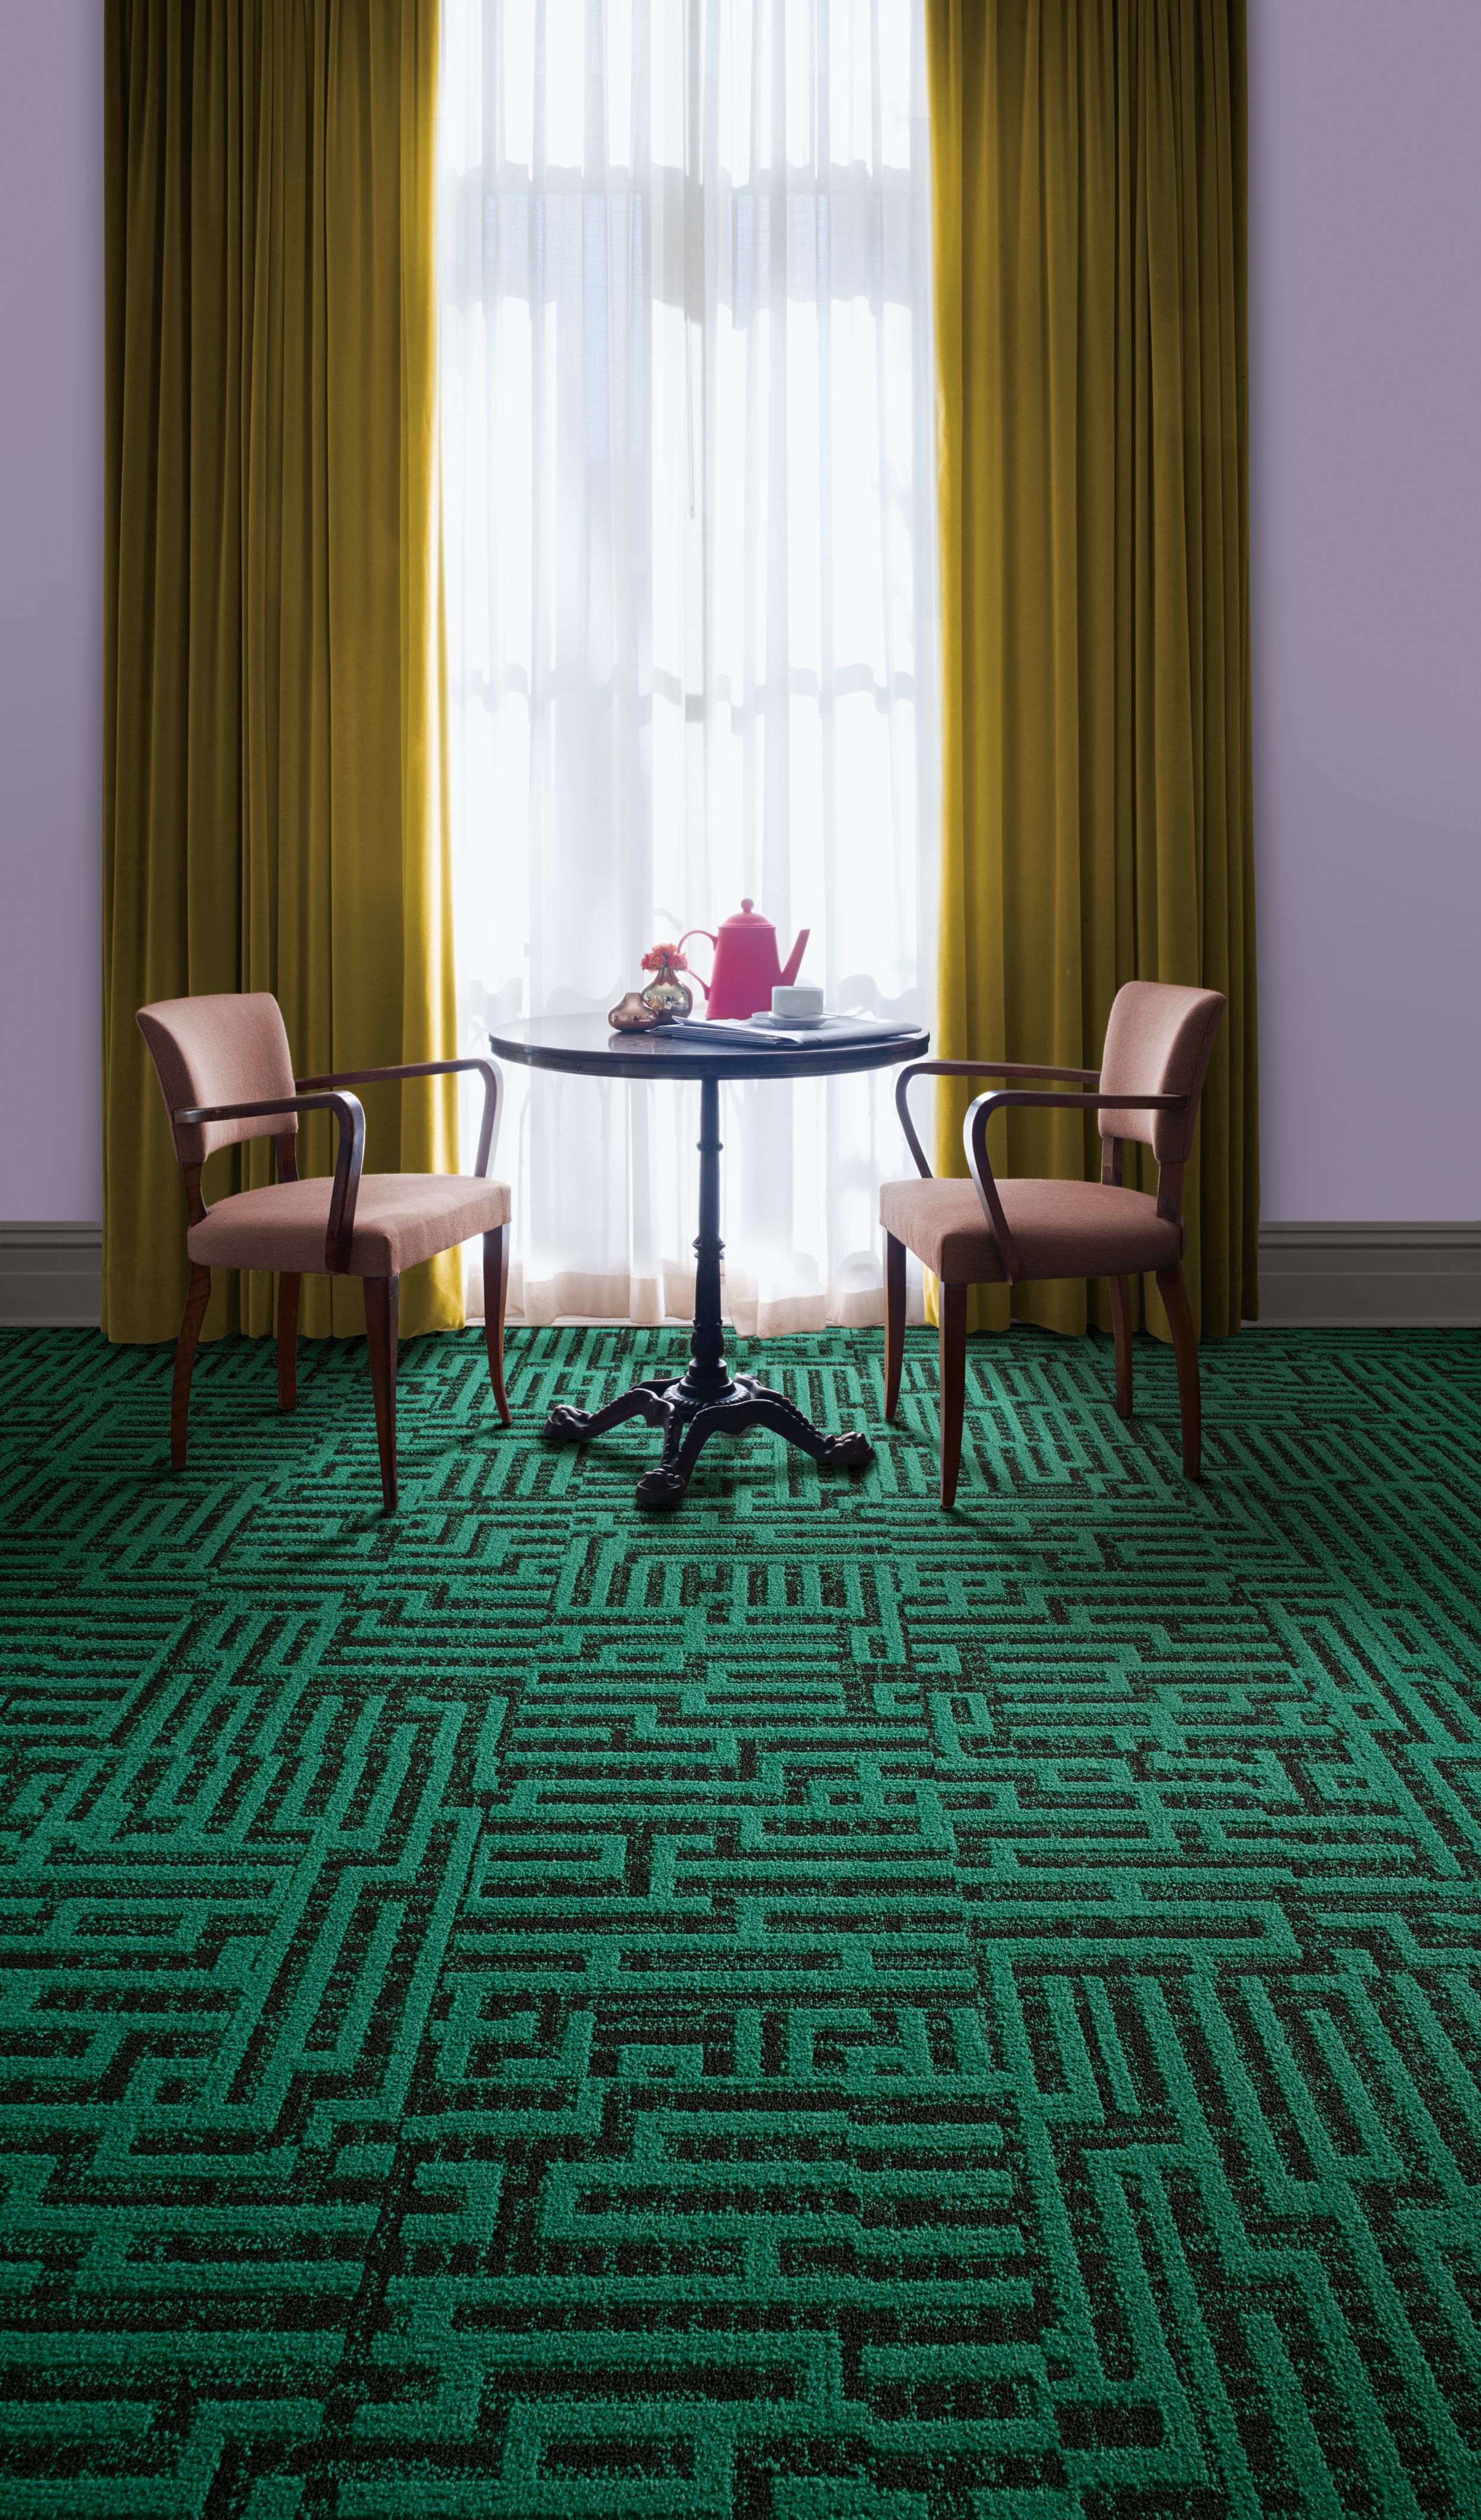 Interface PM29 plank carpet tile in seating area for two by window numéro d’image 1